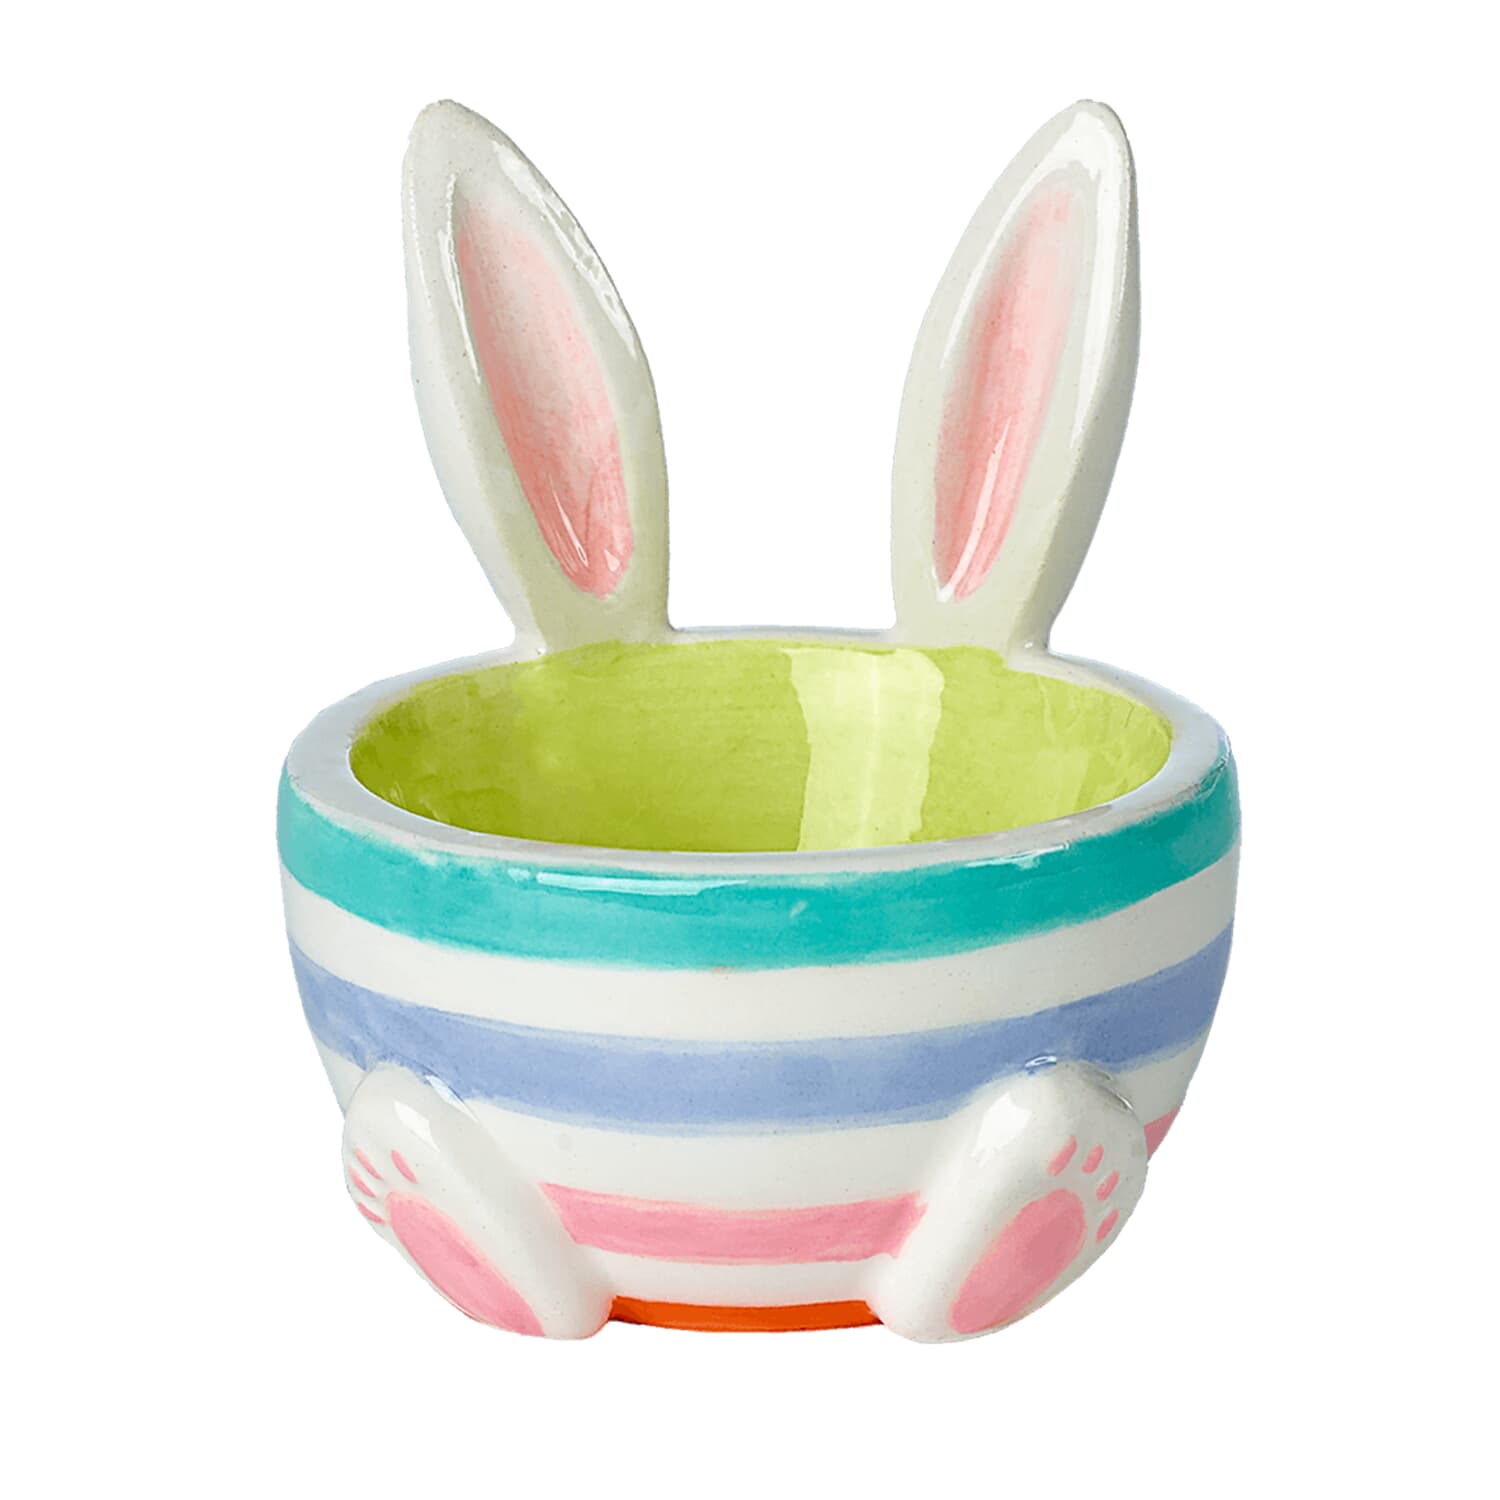 Eggcup with rabbit ears green